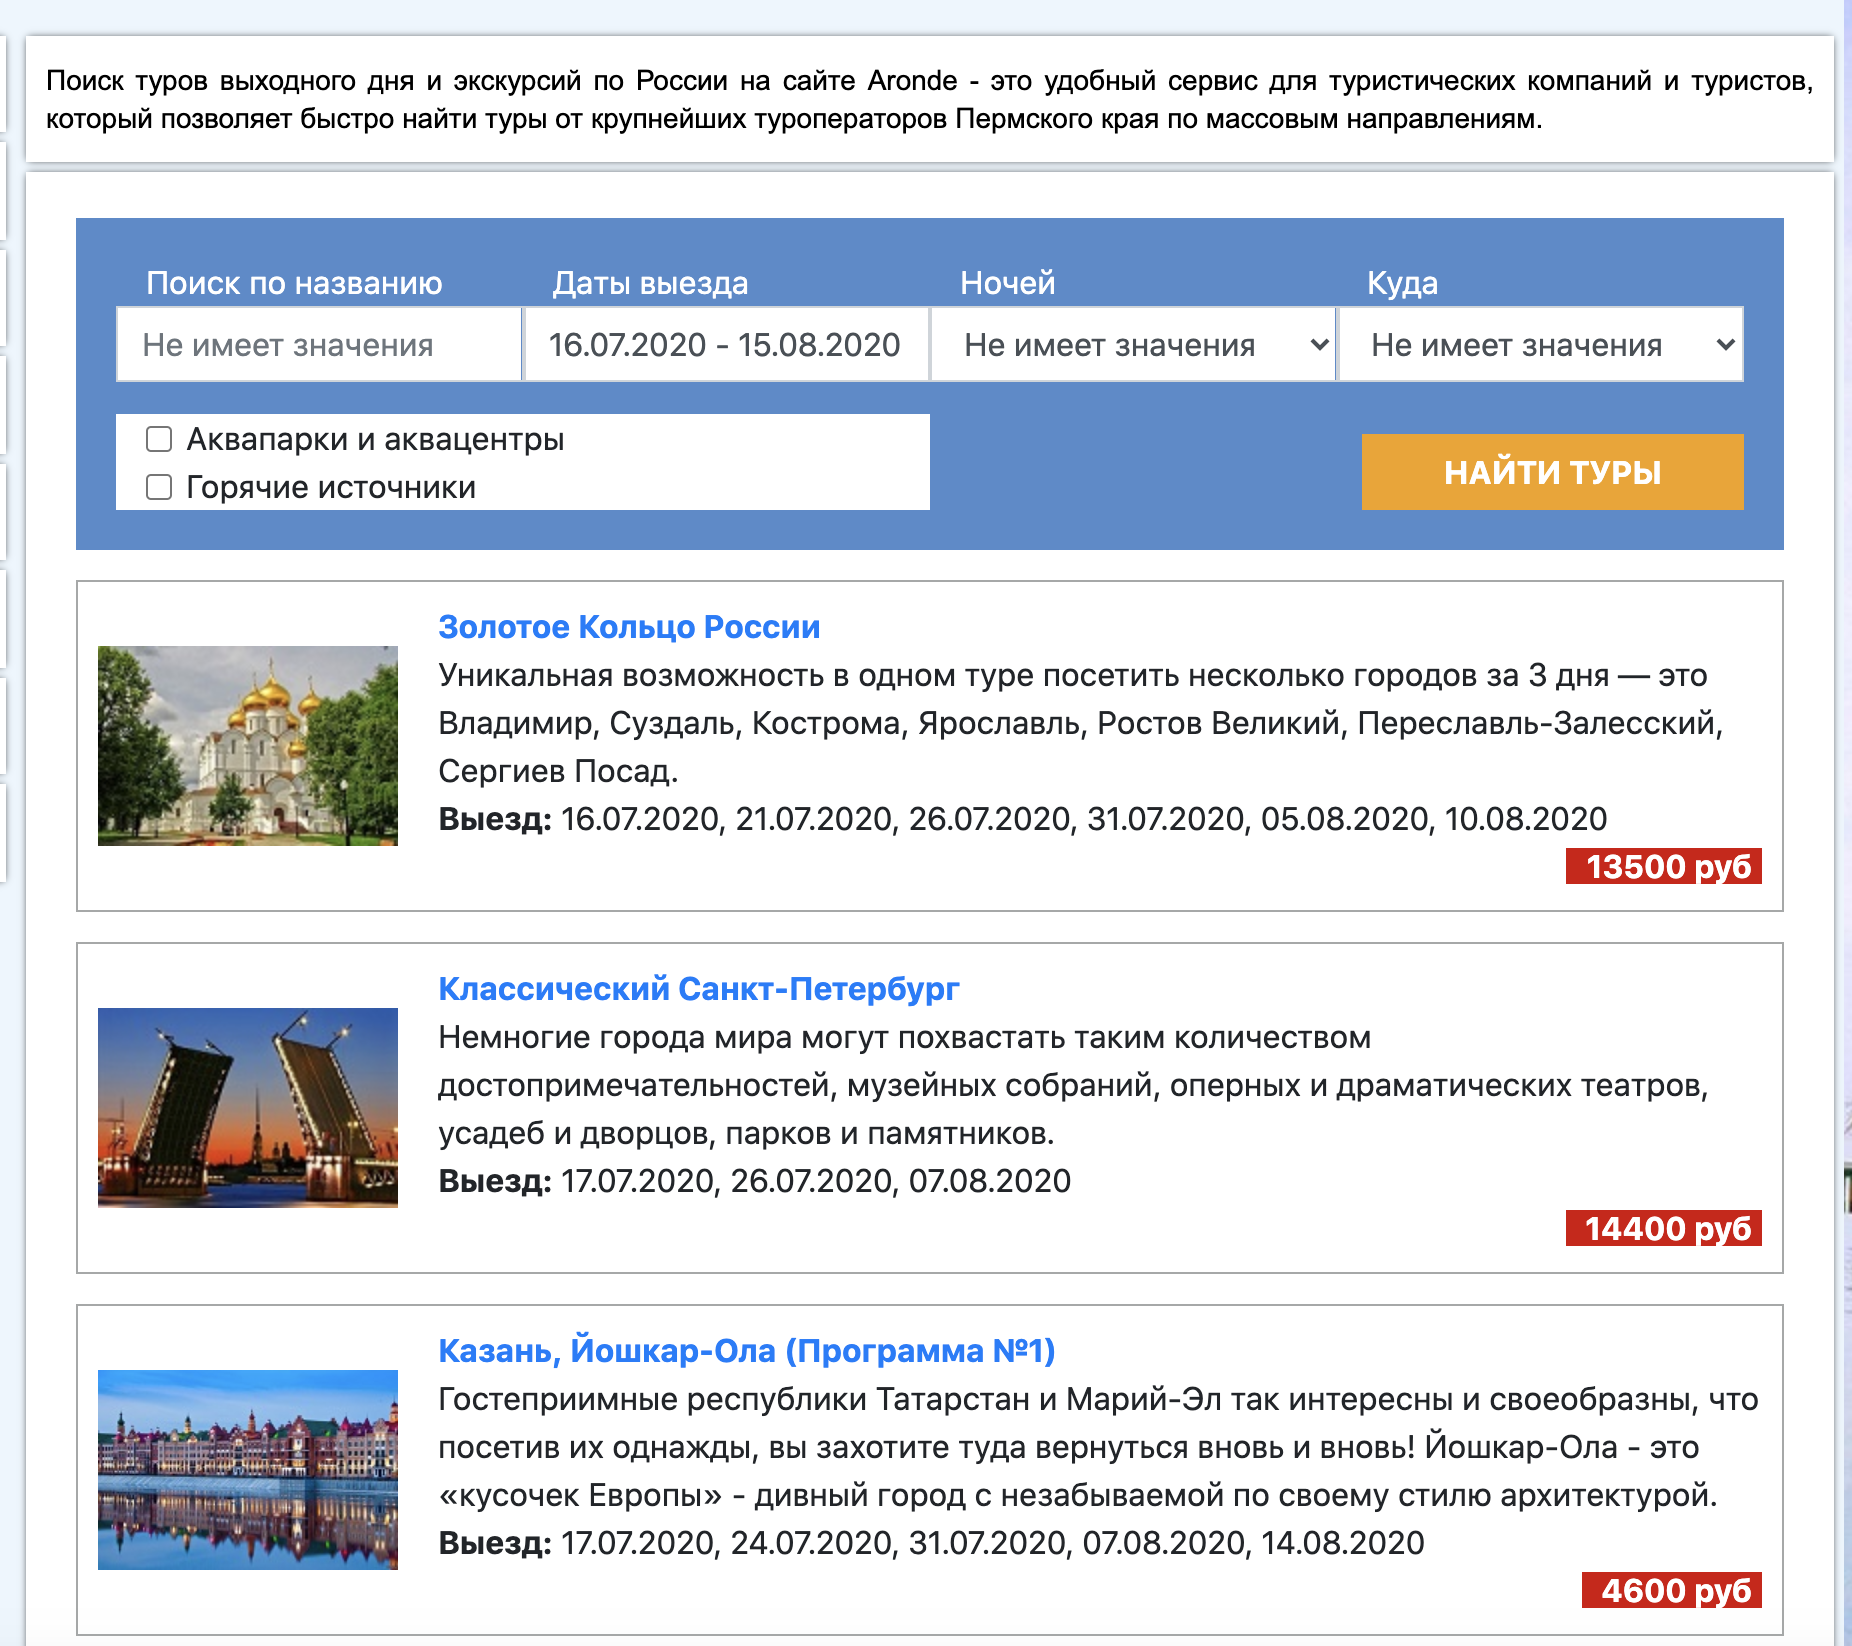 Web application for travel company site. Helps to find desired tours for users